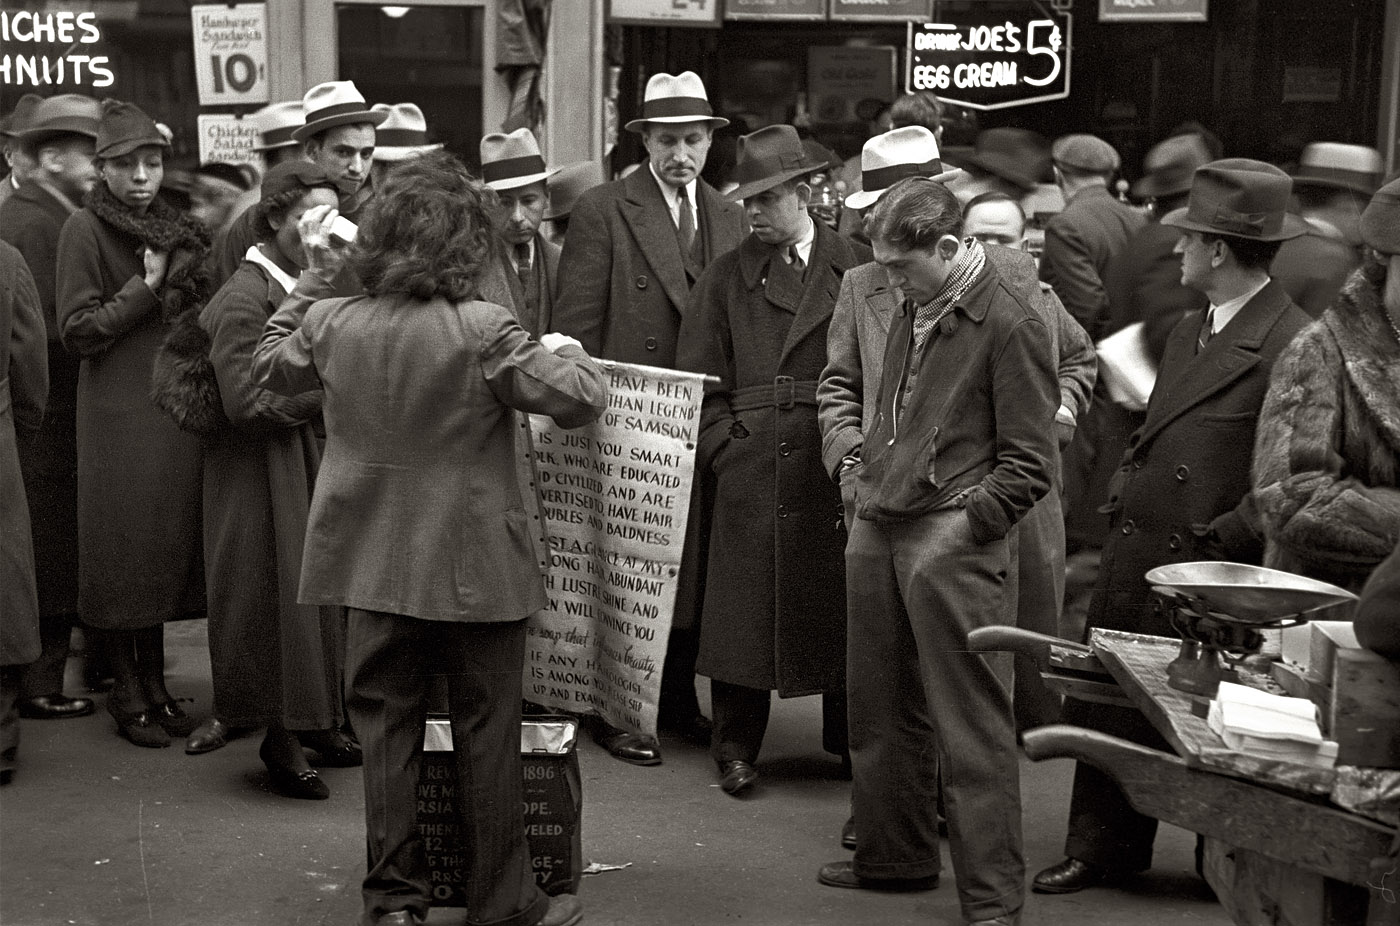 New York, November 1936. "Hair tonic salesman advertising his wares, Seventh Avenue at 38th Street." View full size. 35mm nitrate negative by Russell Lee.